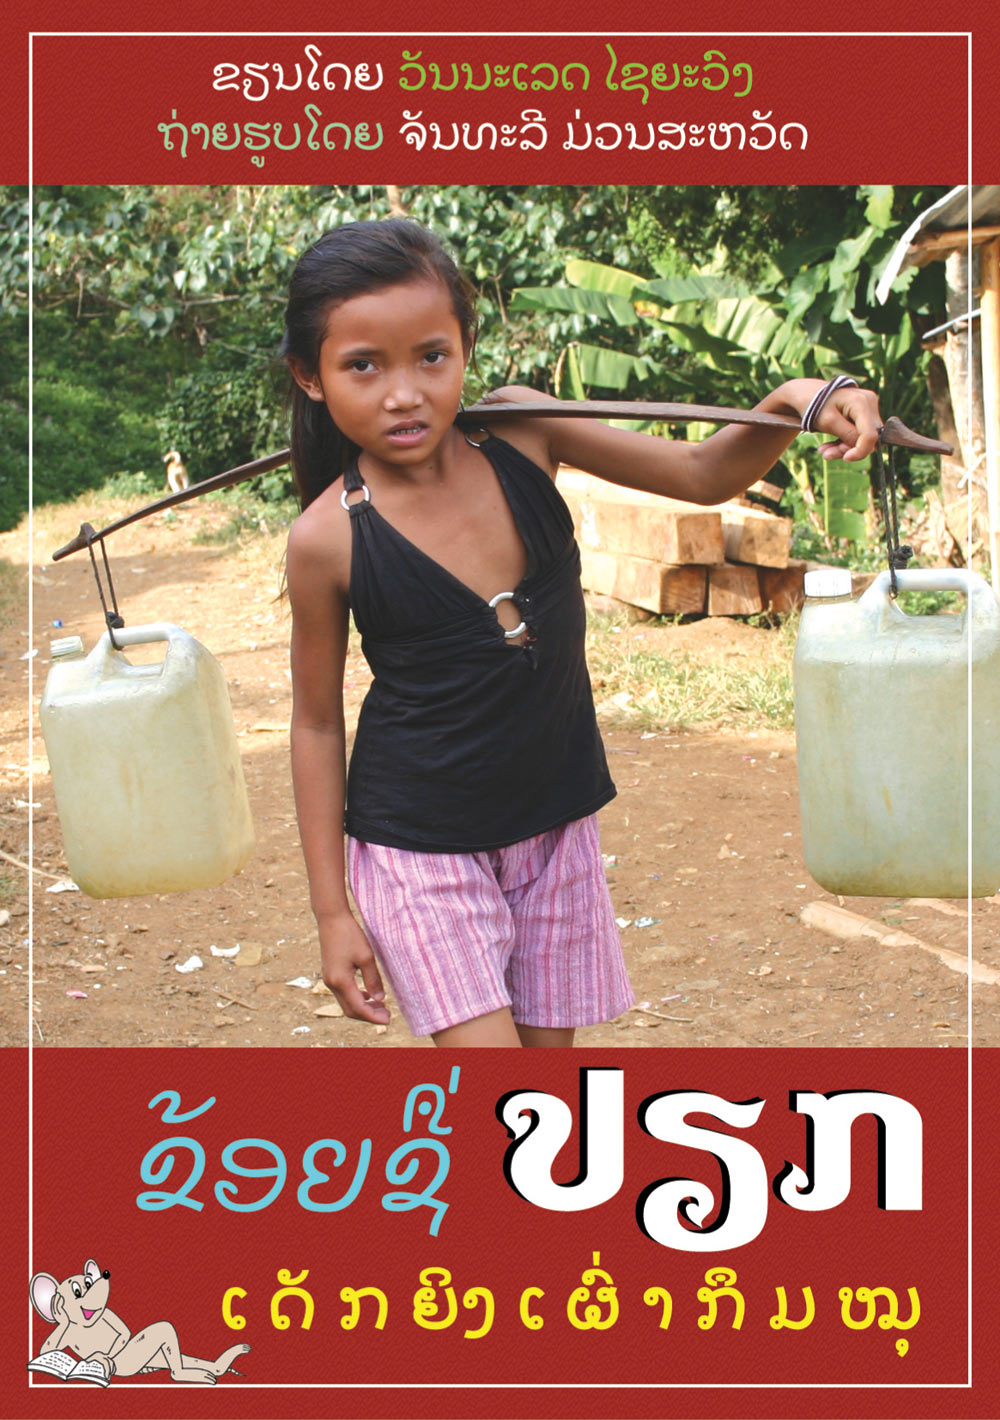 I am Piak large book cover, published in Lao language